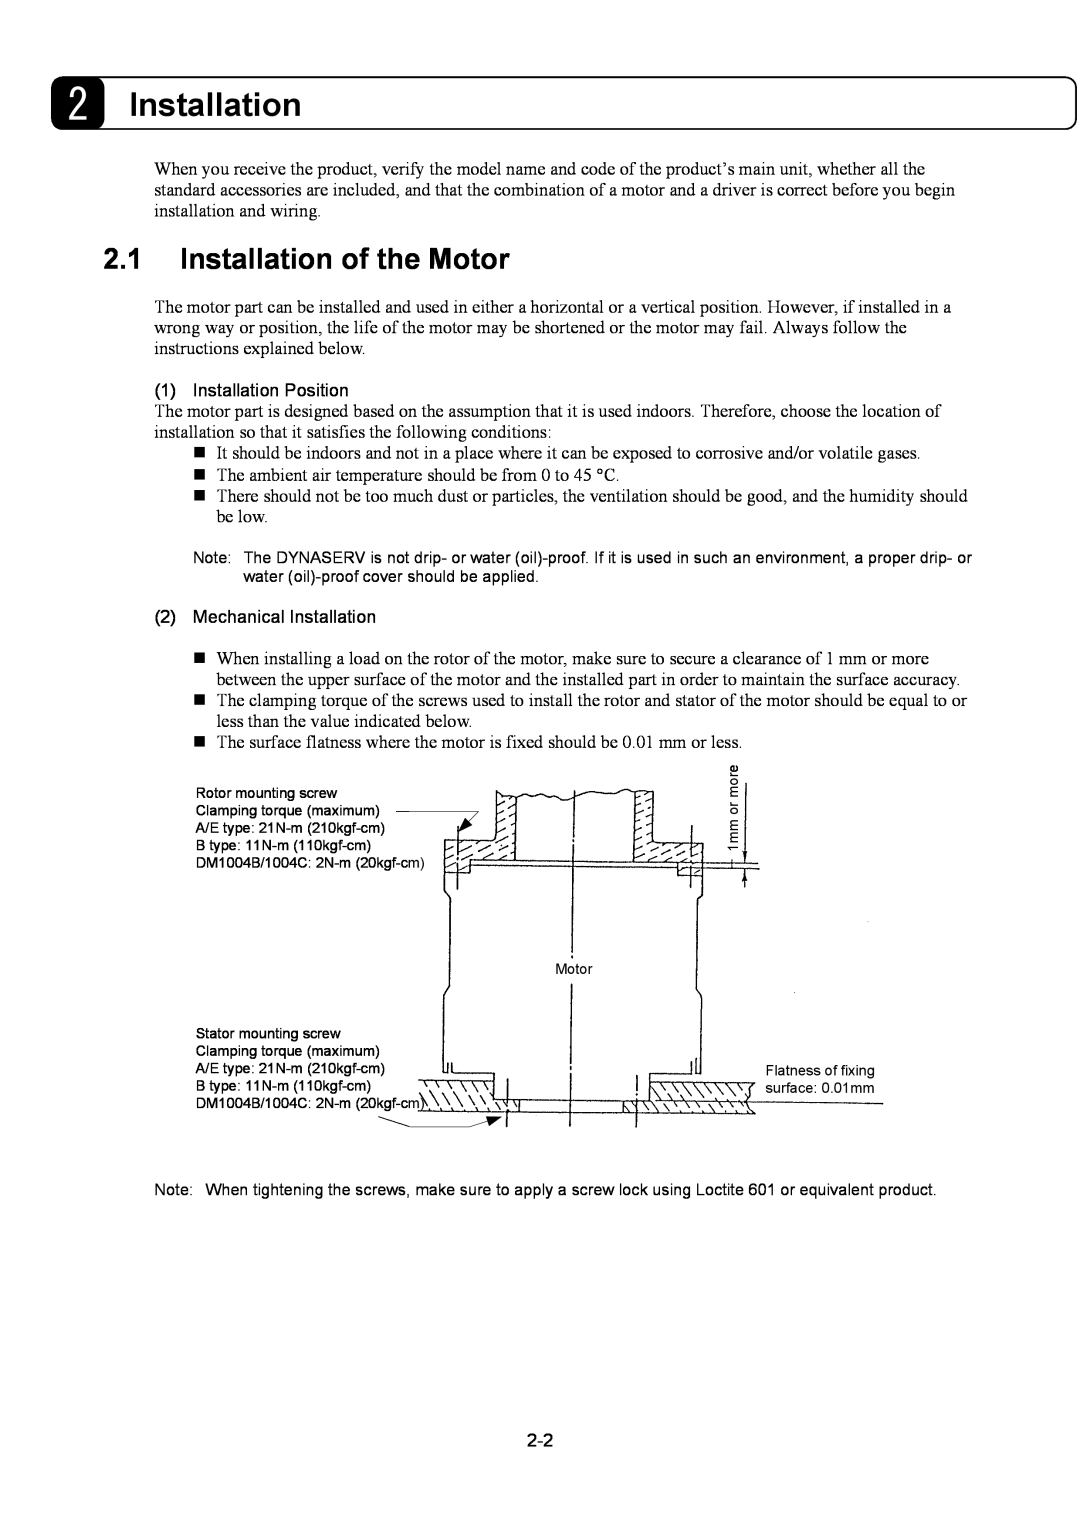 Parker Hannifin G2 manual Installation of the Motor 